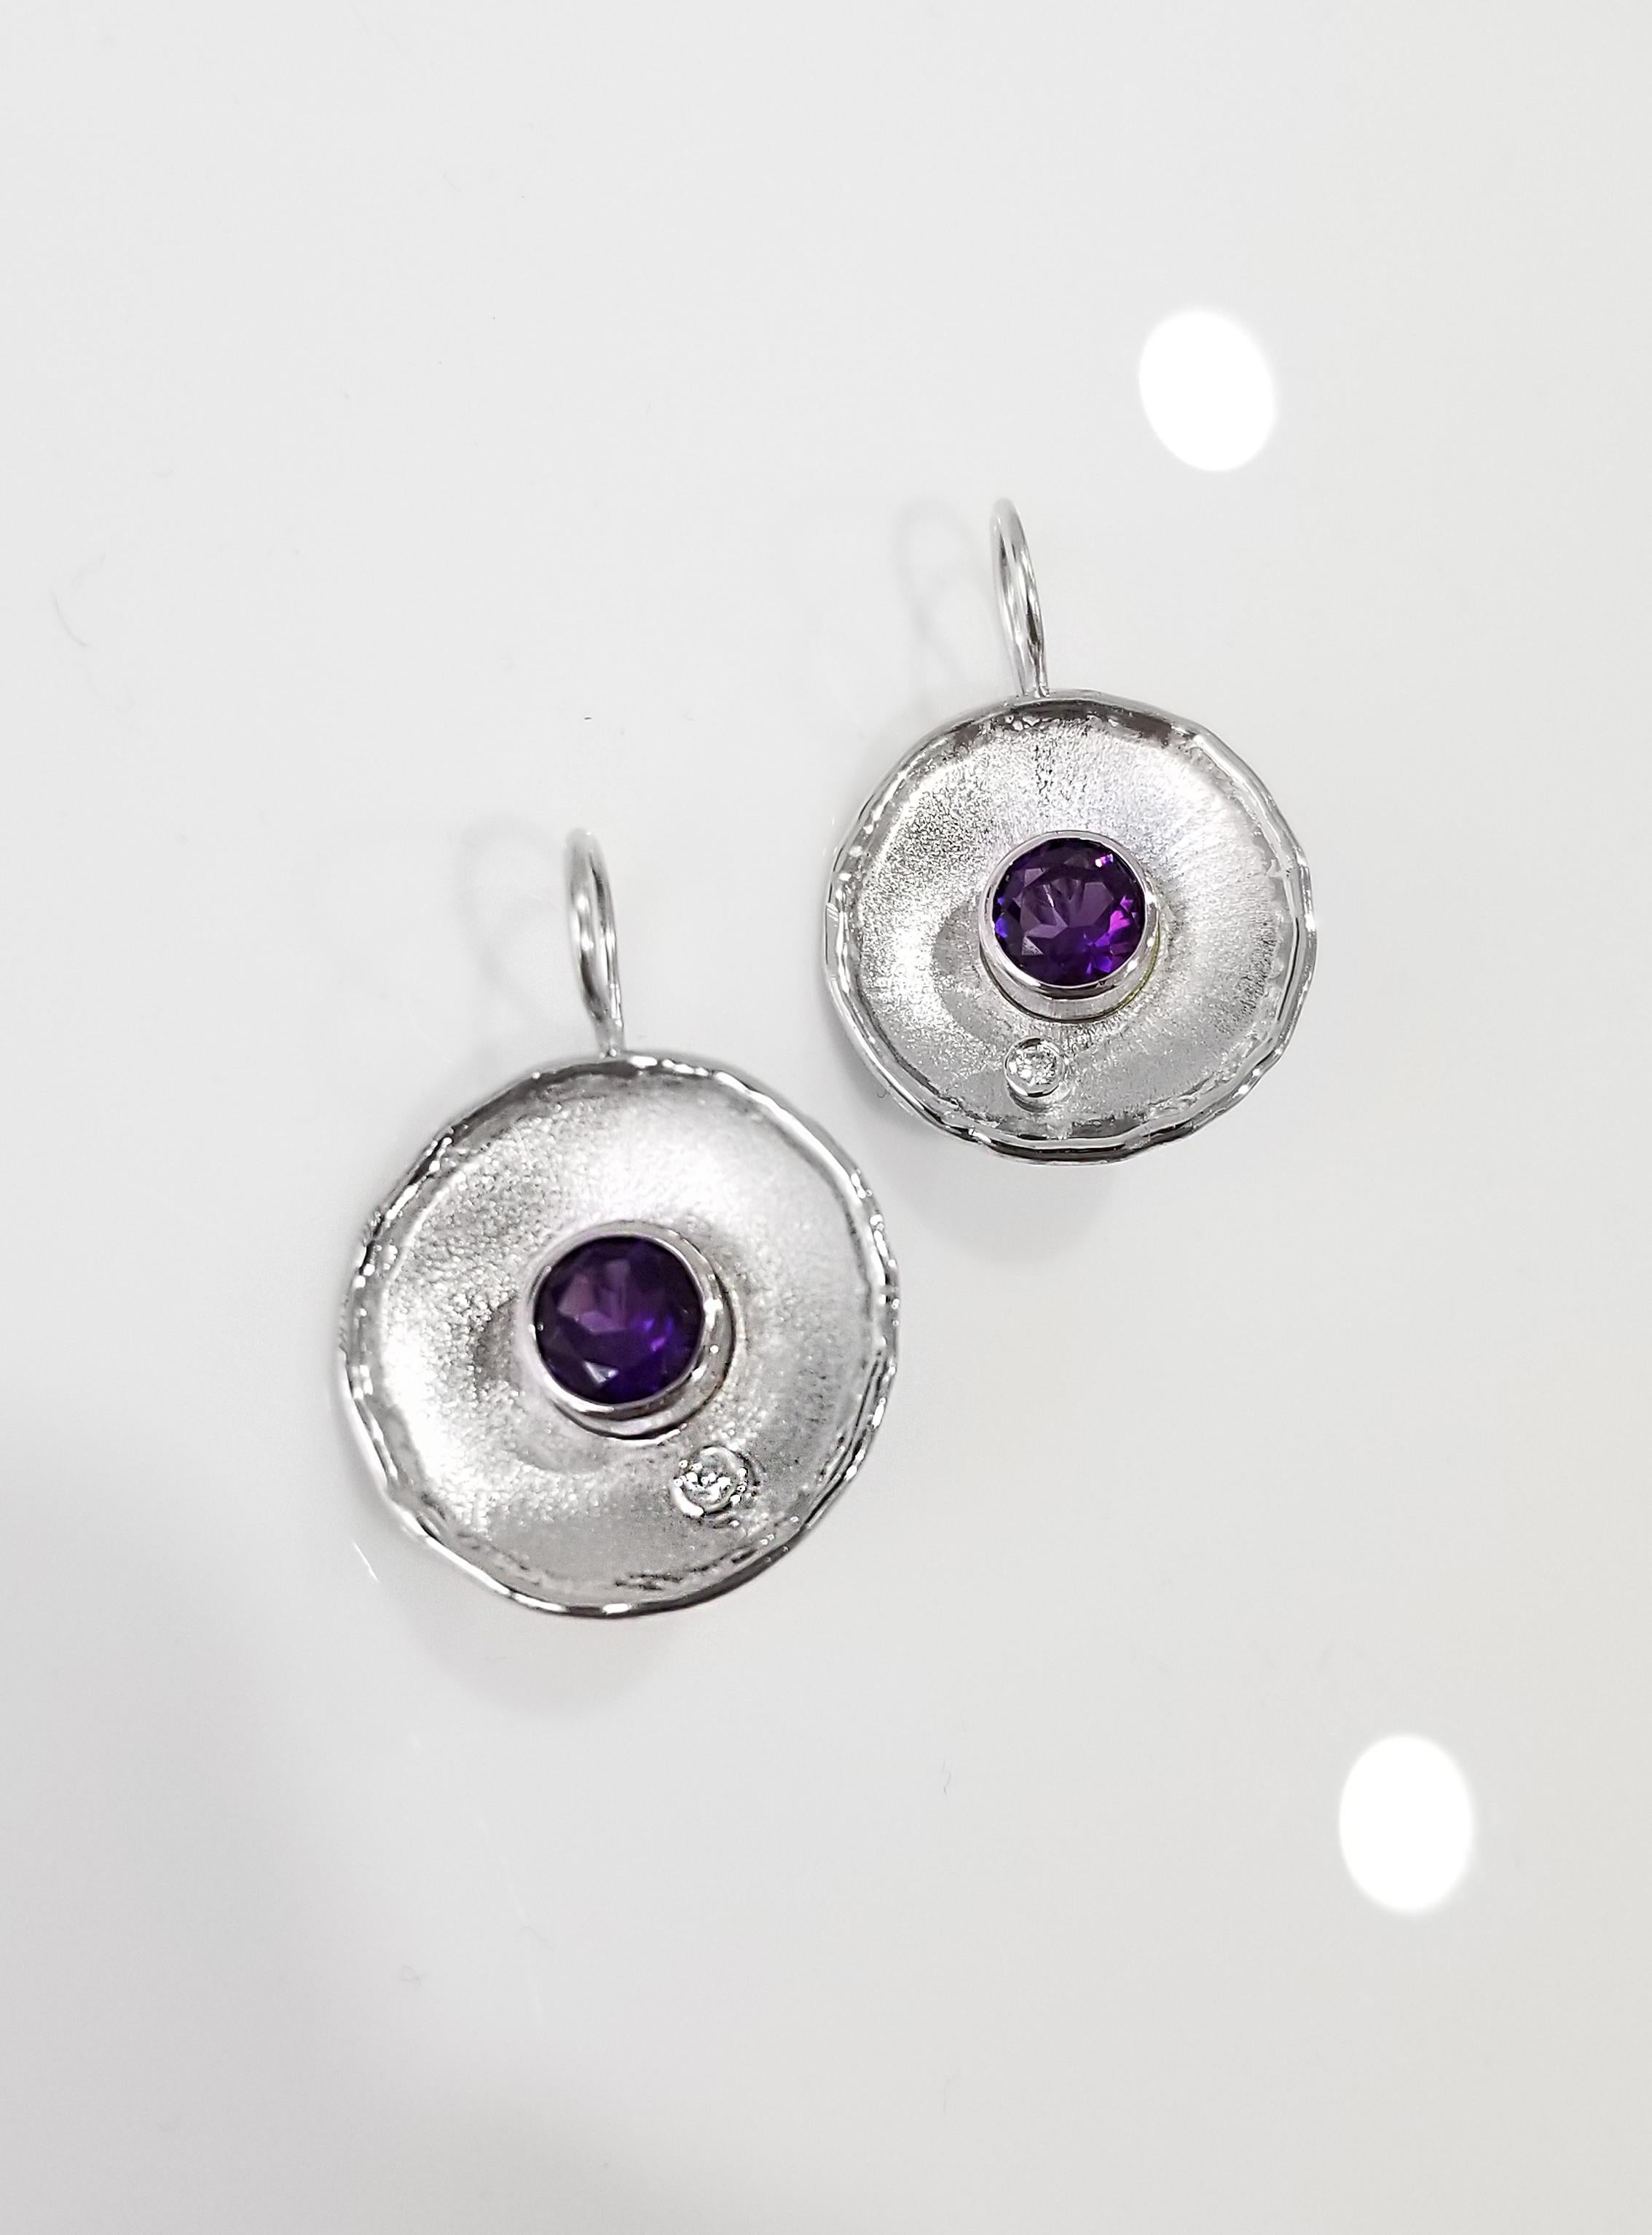 From Yianni Creations Ammos Collection, this is handmade artisan earrings from a fine silver plated with palladium to resist against elements. Each earring features 1.80 carat round cut Amethyst complimented by 0.03-carat brilliant cut diamond.